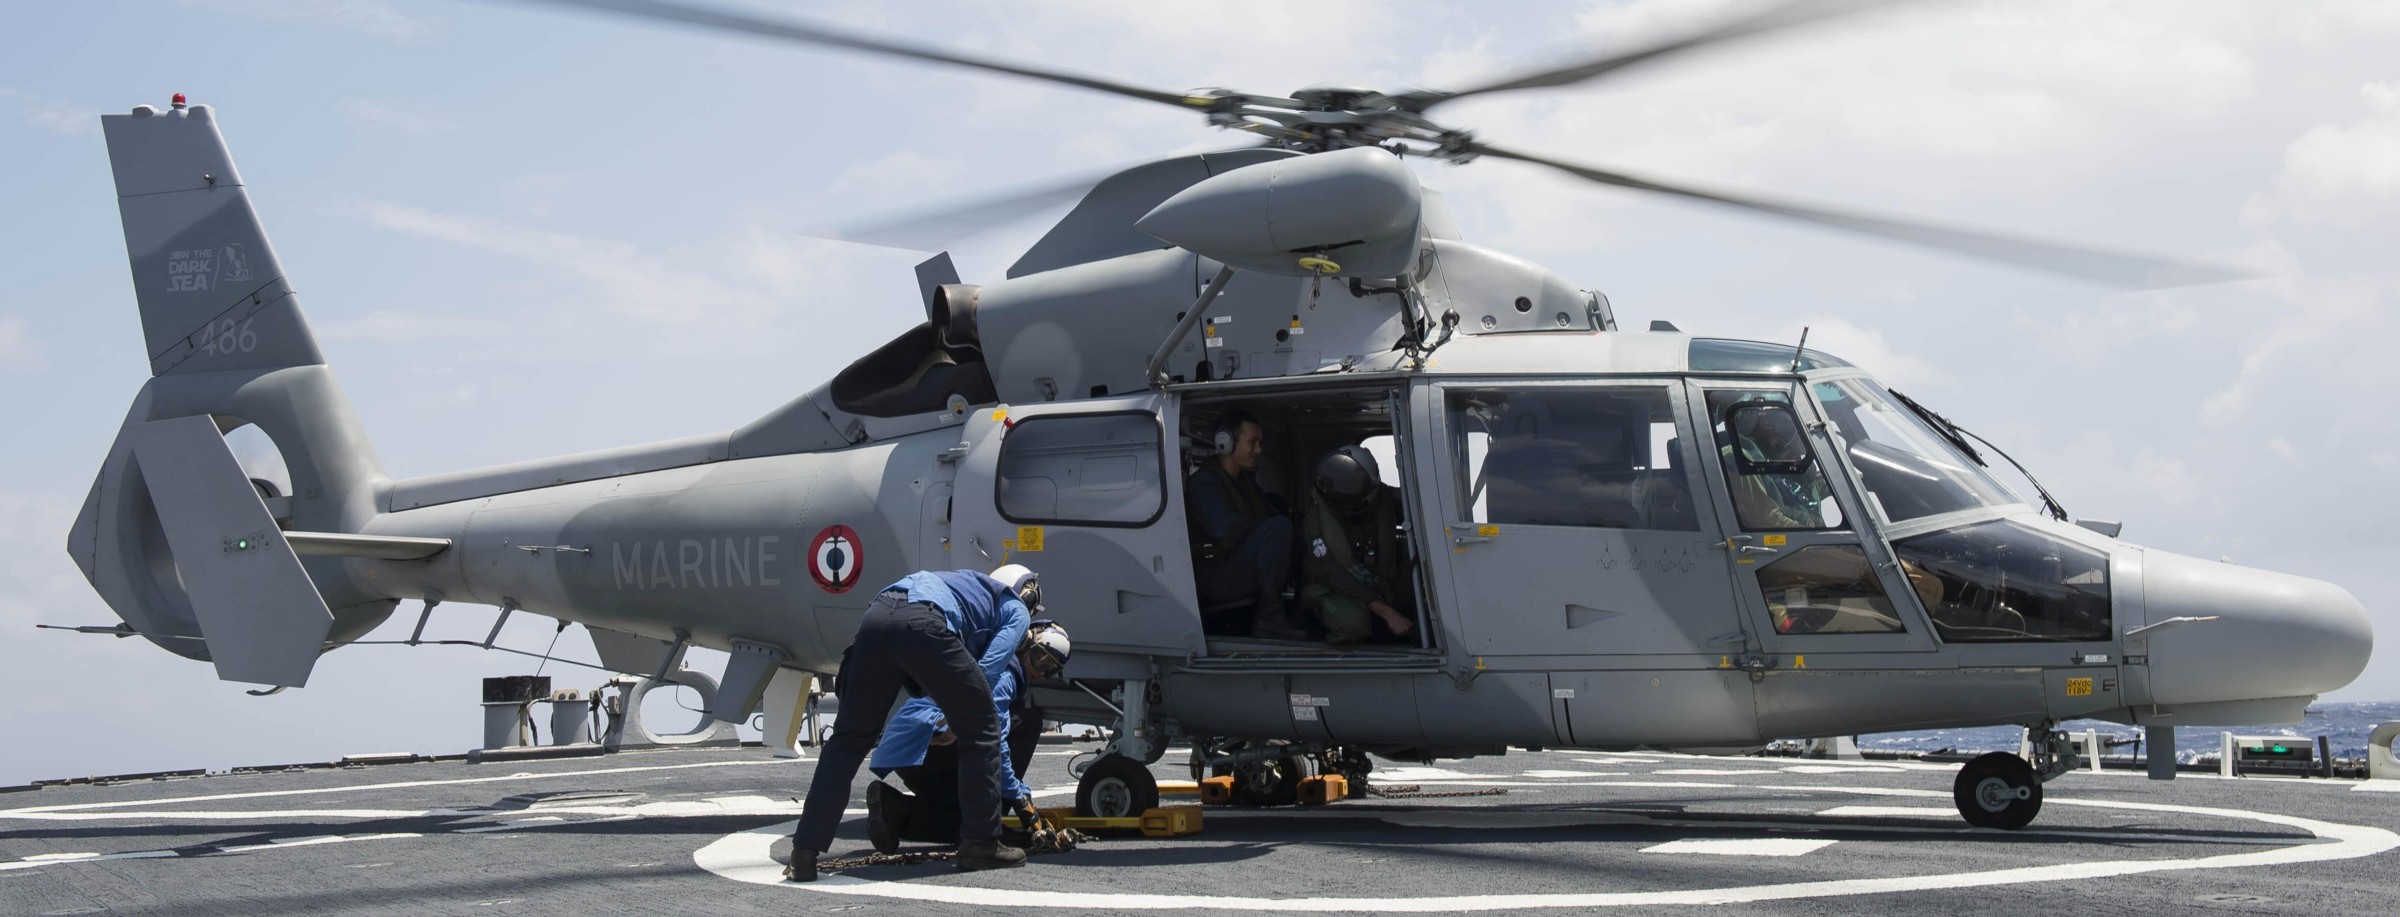 as-565sa panther helicopter french navy marine nationale flottille 36f ban hyeres toulon 38